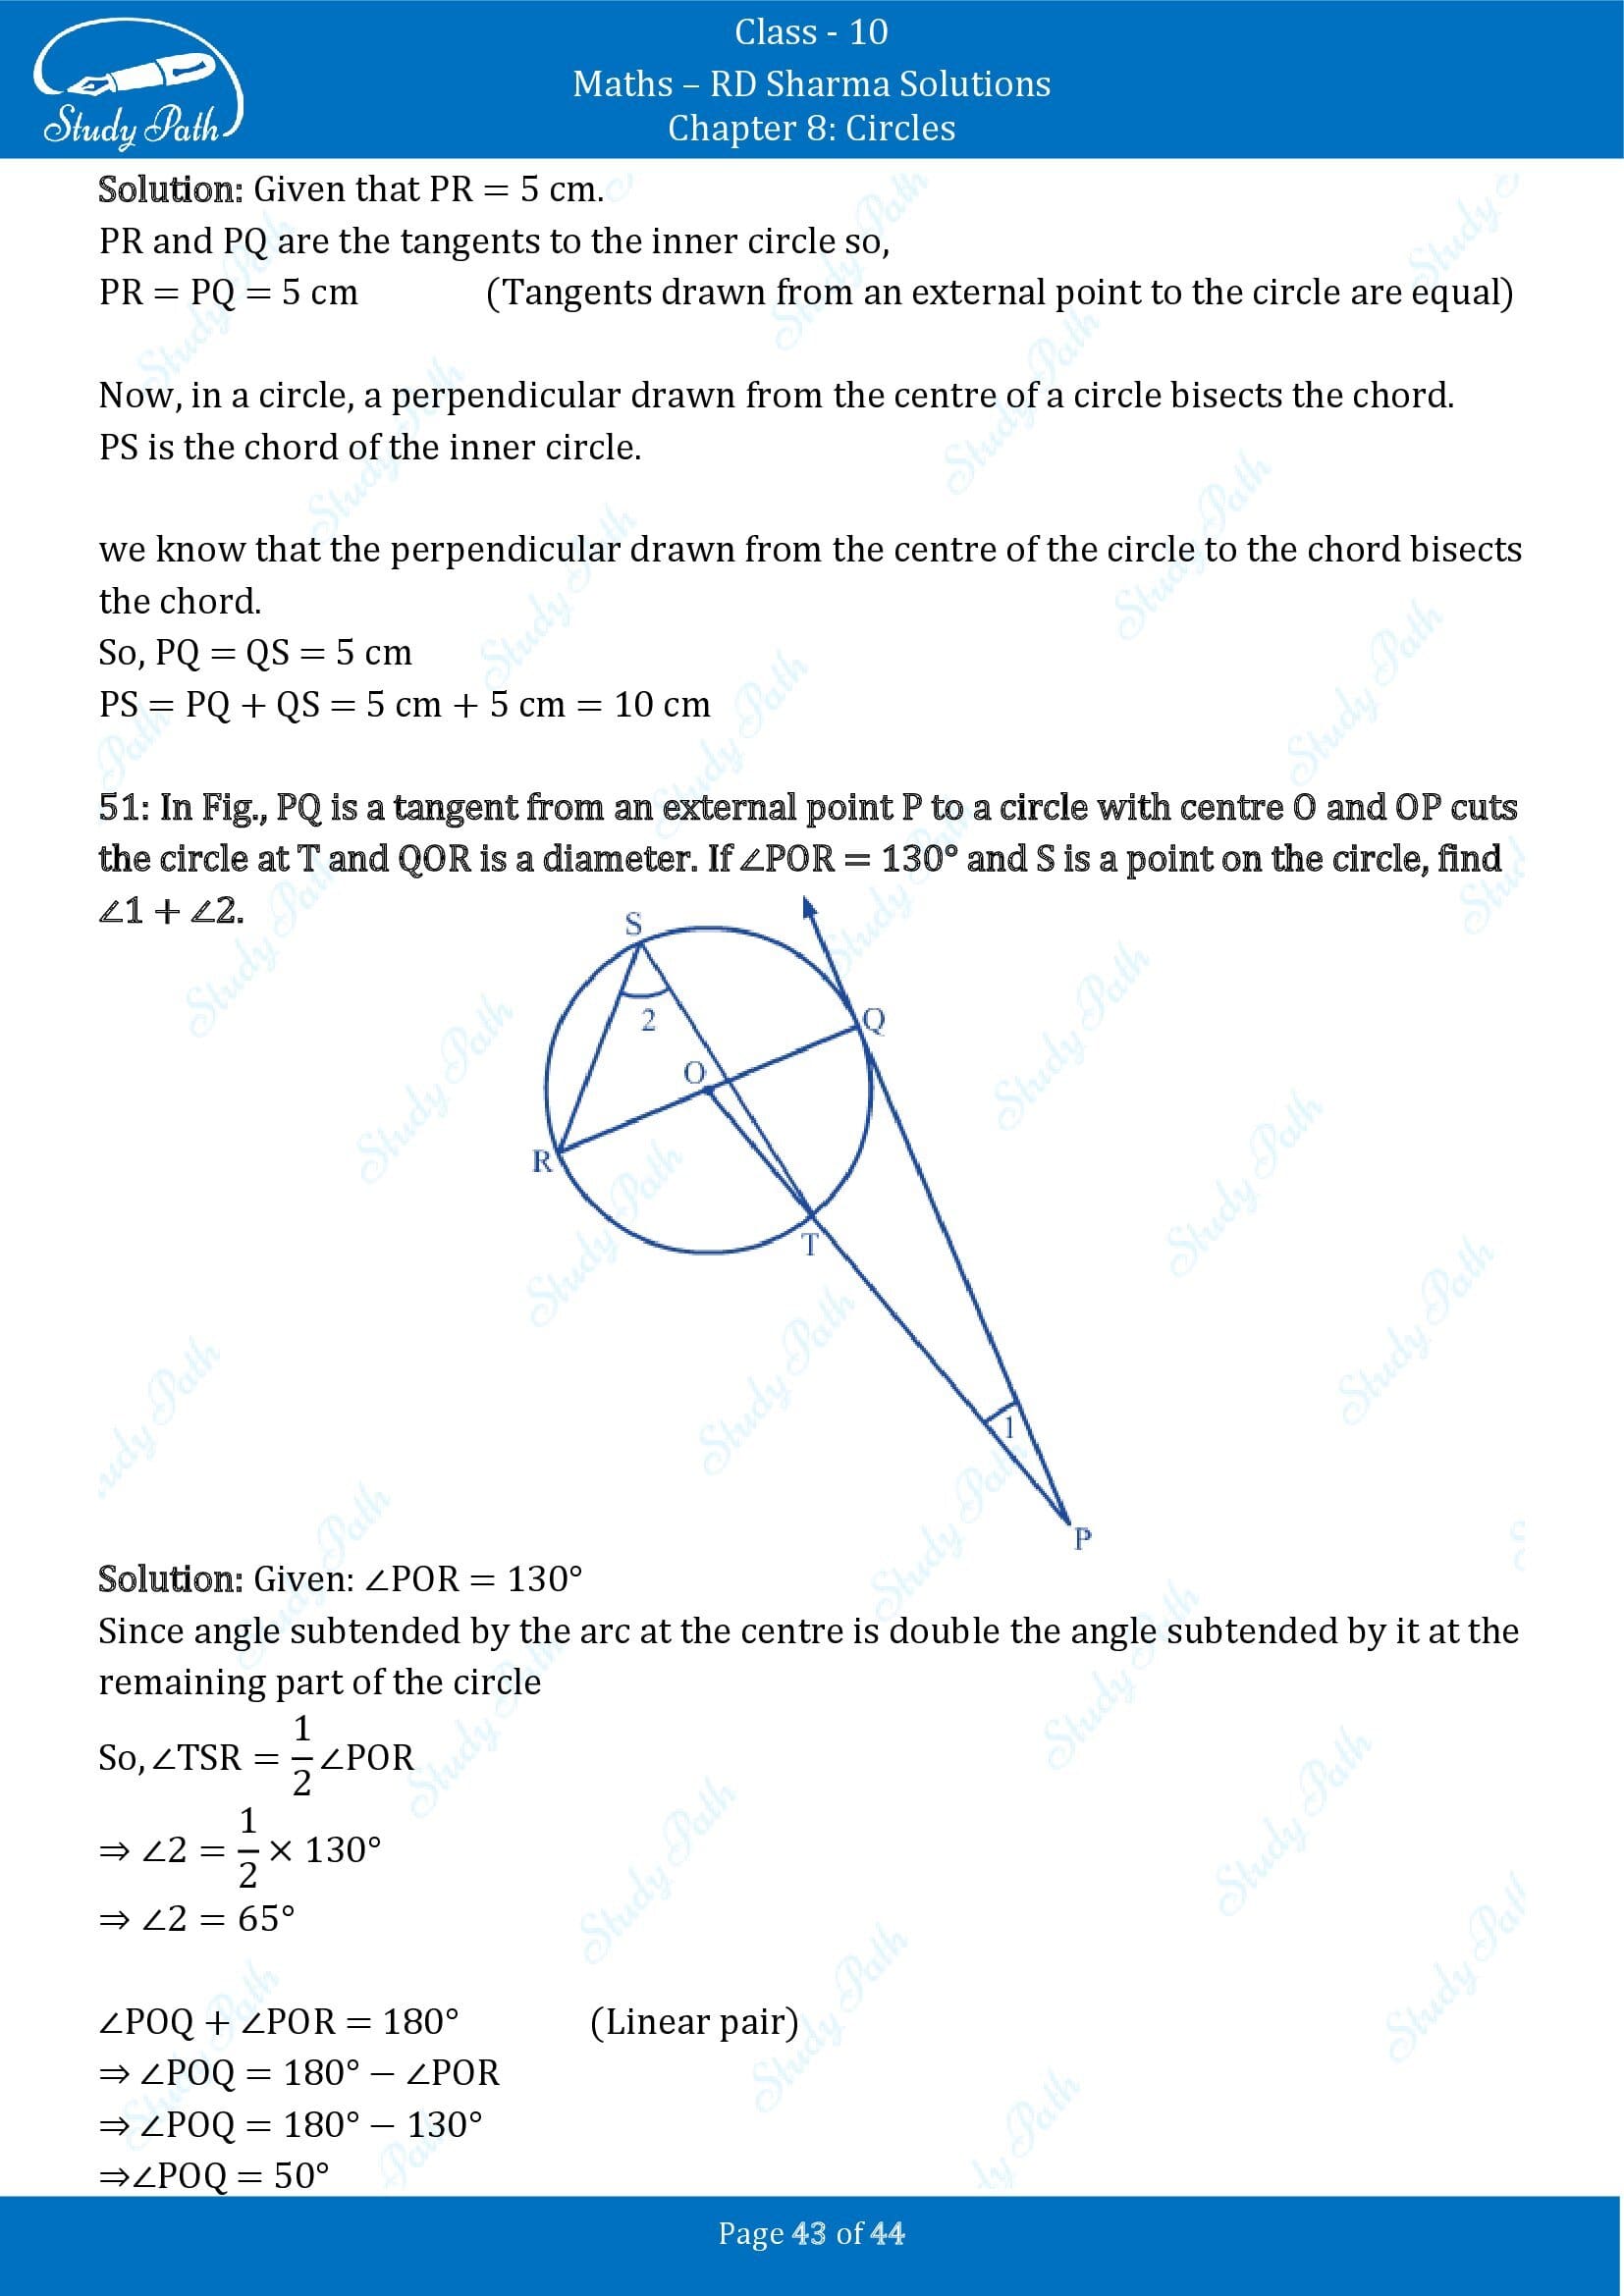 RD Sharma Solutions Class 10 Chapter 8 Circles Exercise 8.2 00043